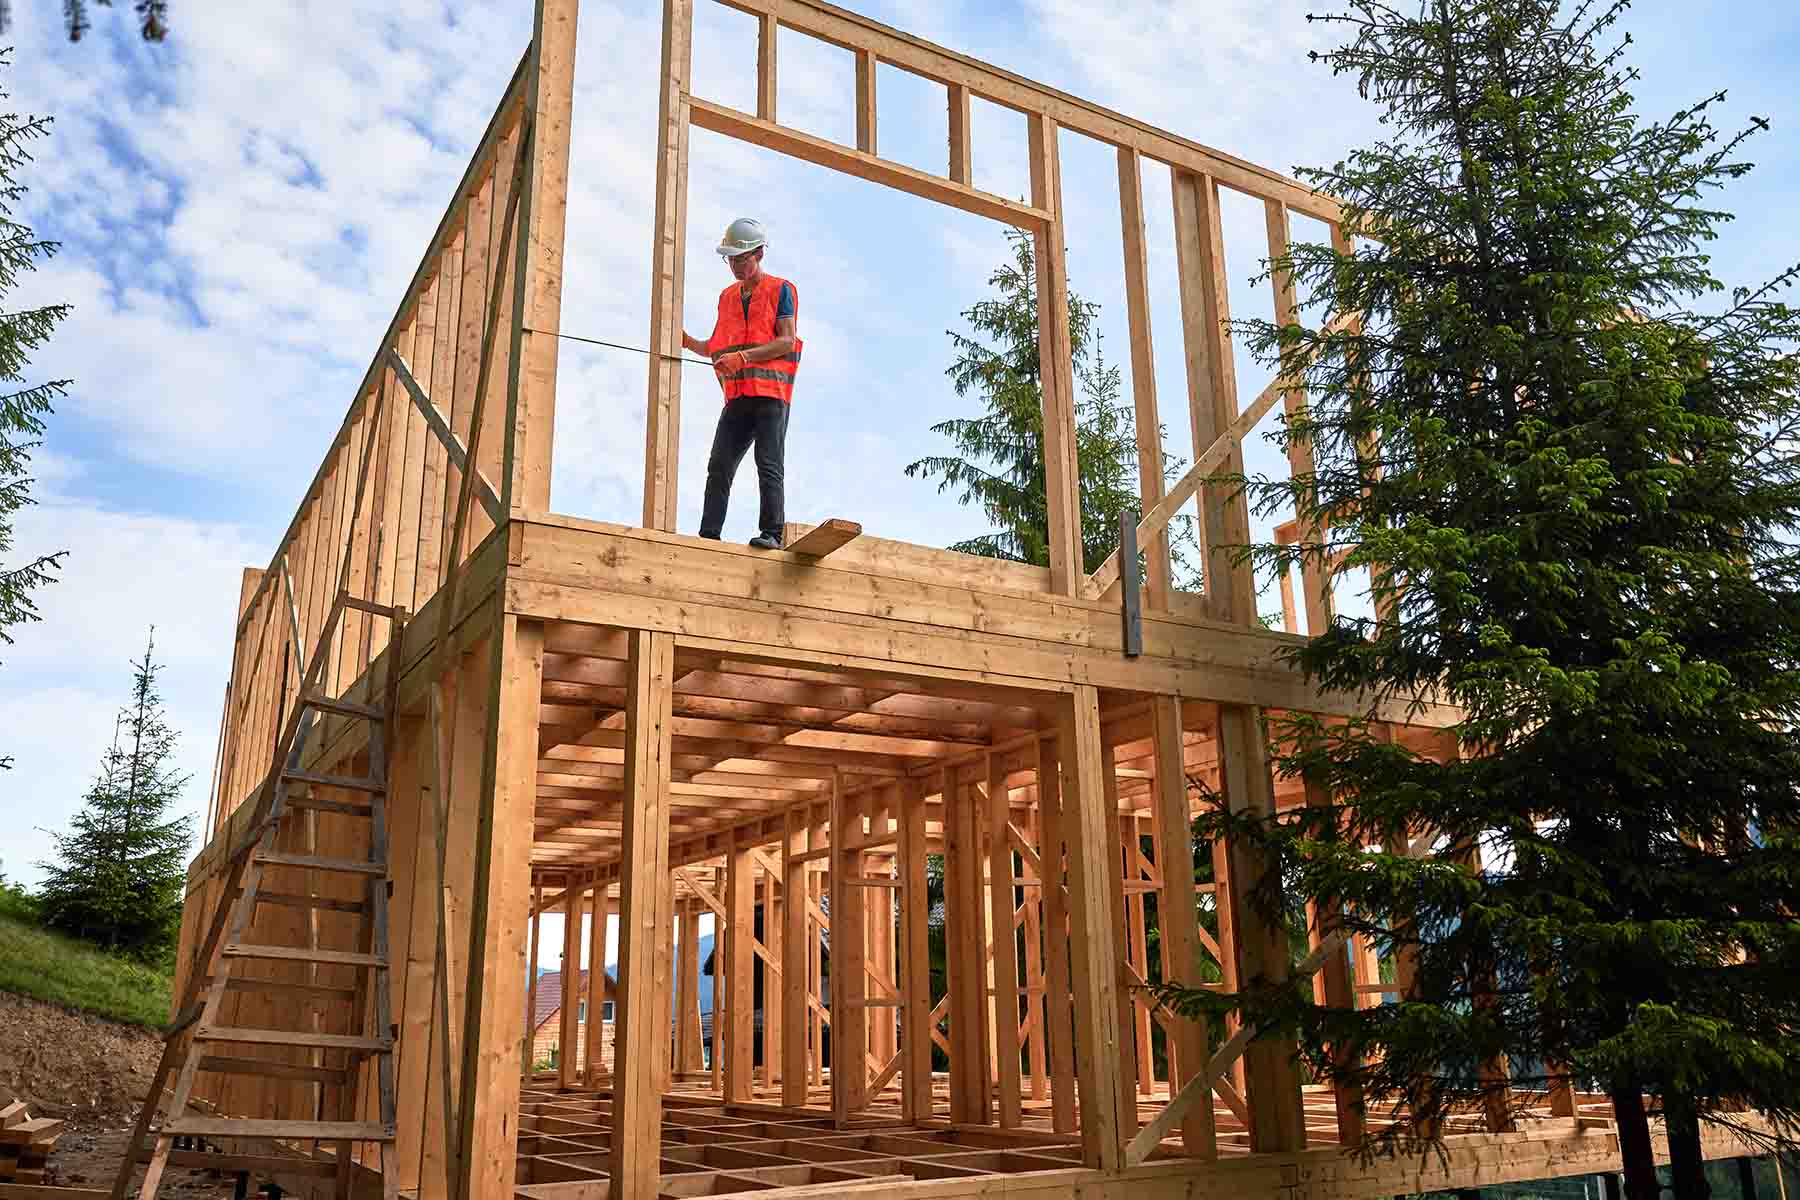 A man in an orange vest uses a tape measure while building a wooden frame house surrounded by trees.